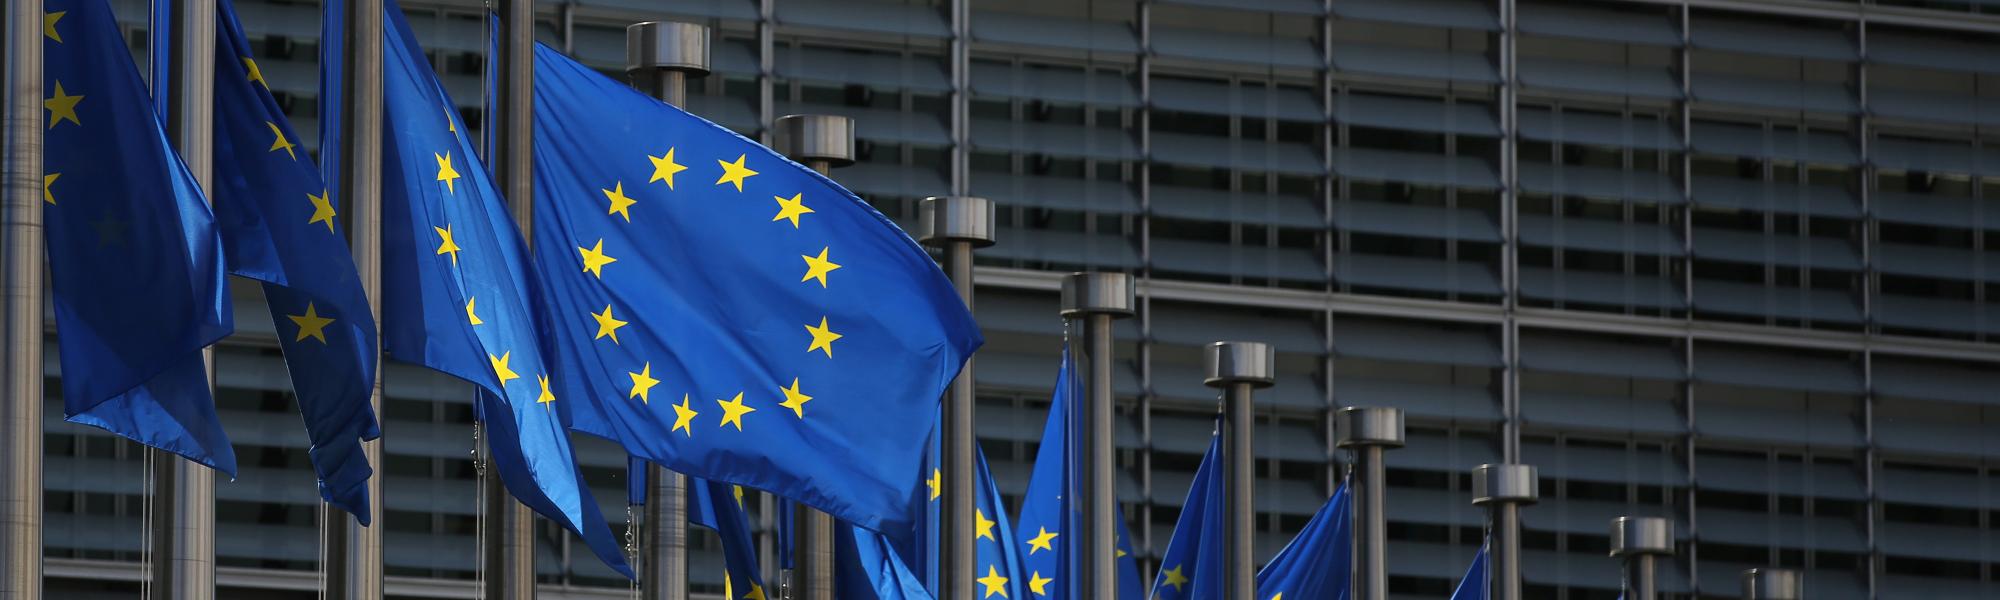 EU ends road transport state aid discrimination, opens new door to decarbonisation help